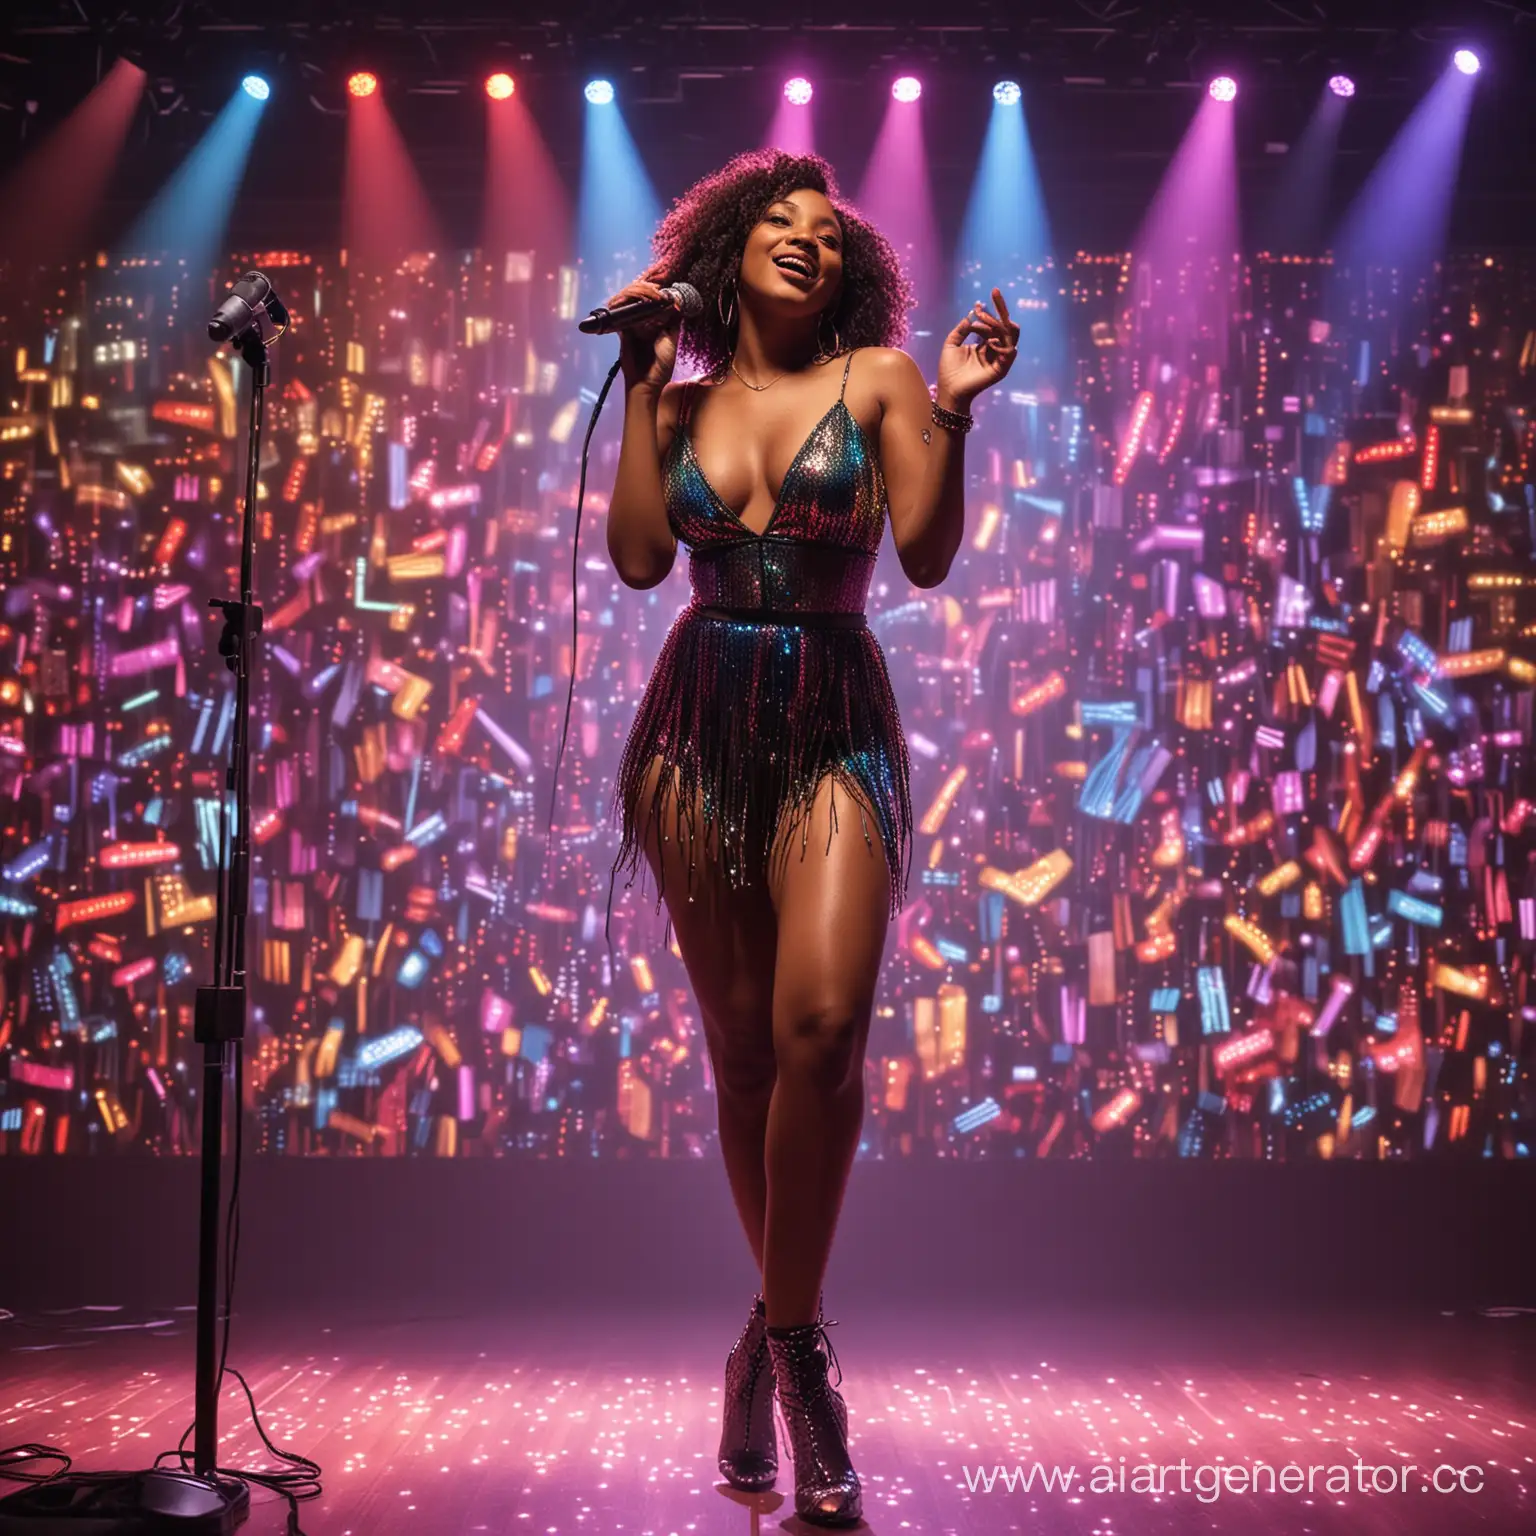 An image of the singer on stage with a microphone, surrounded by colorful lights and graphics representing different music genres (pop, jazz, rock, R&B, etc.). The singer is confidently transitioning between styles, captivating the audience with their versatility. full body dancing on stage and smile looking at viewera 
